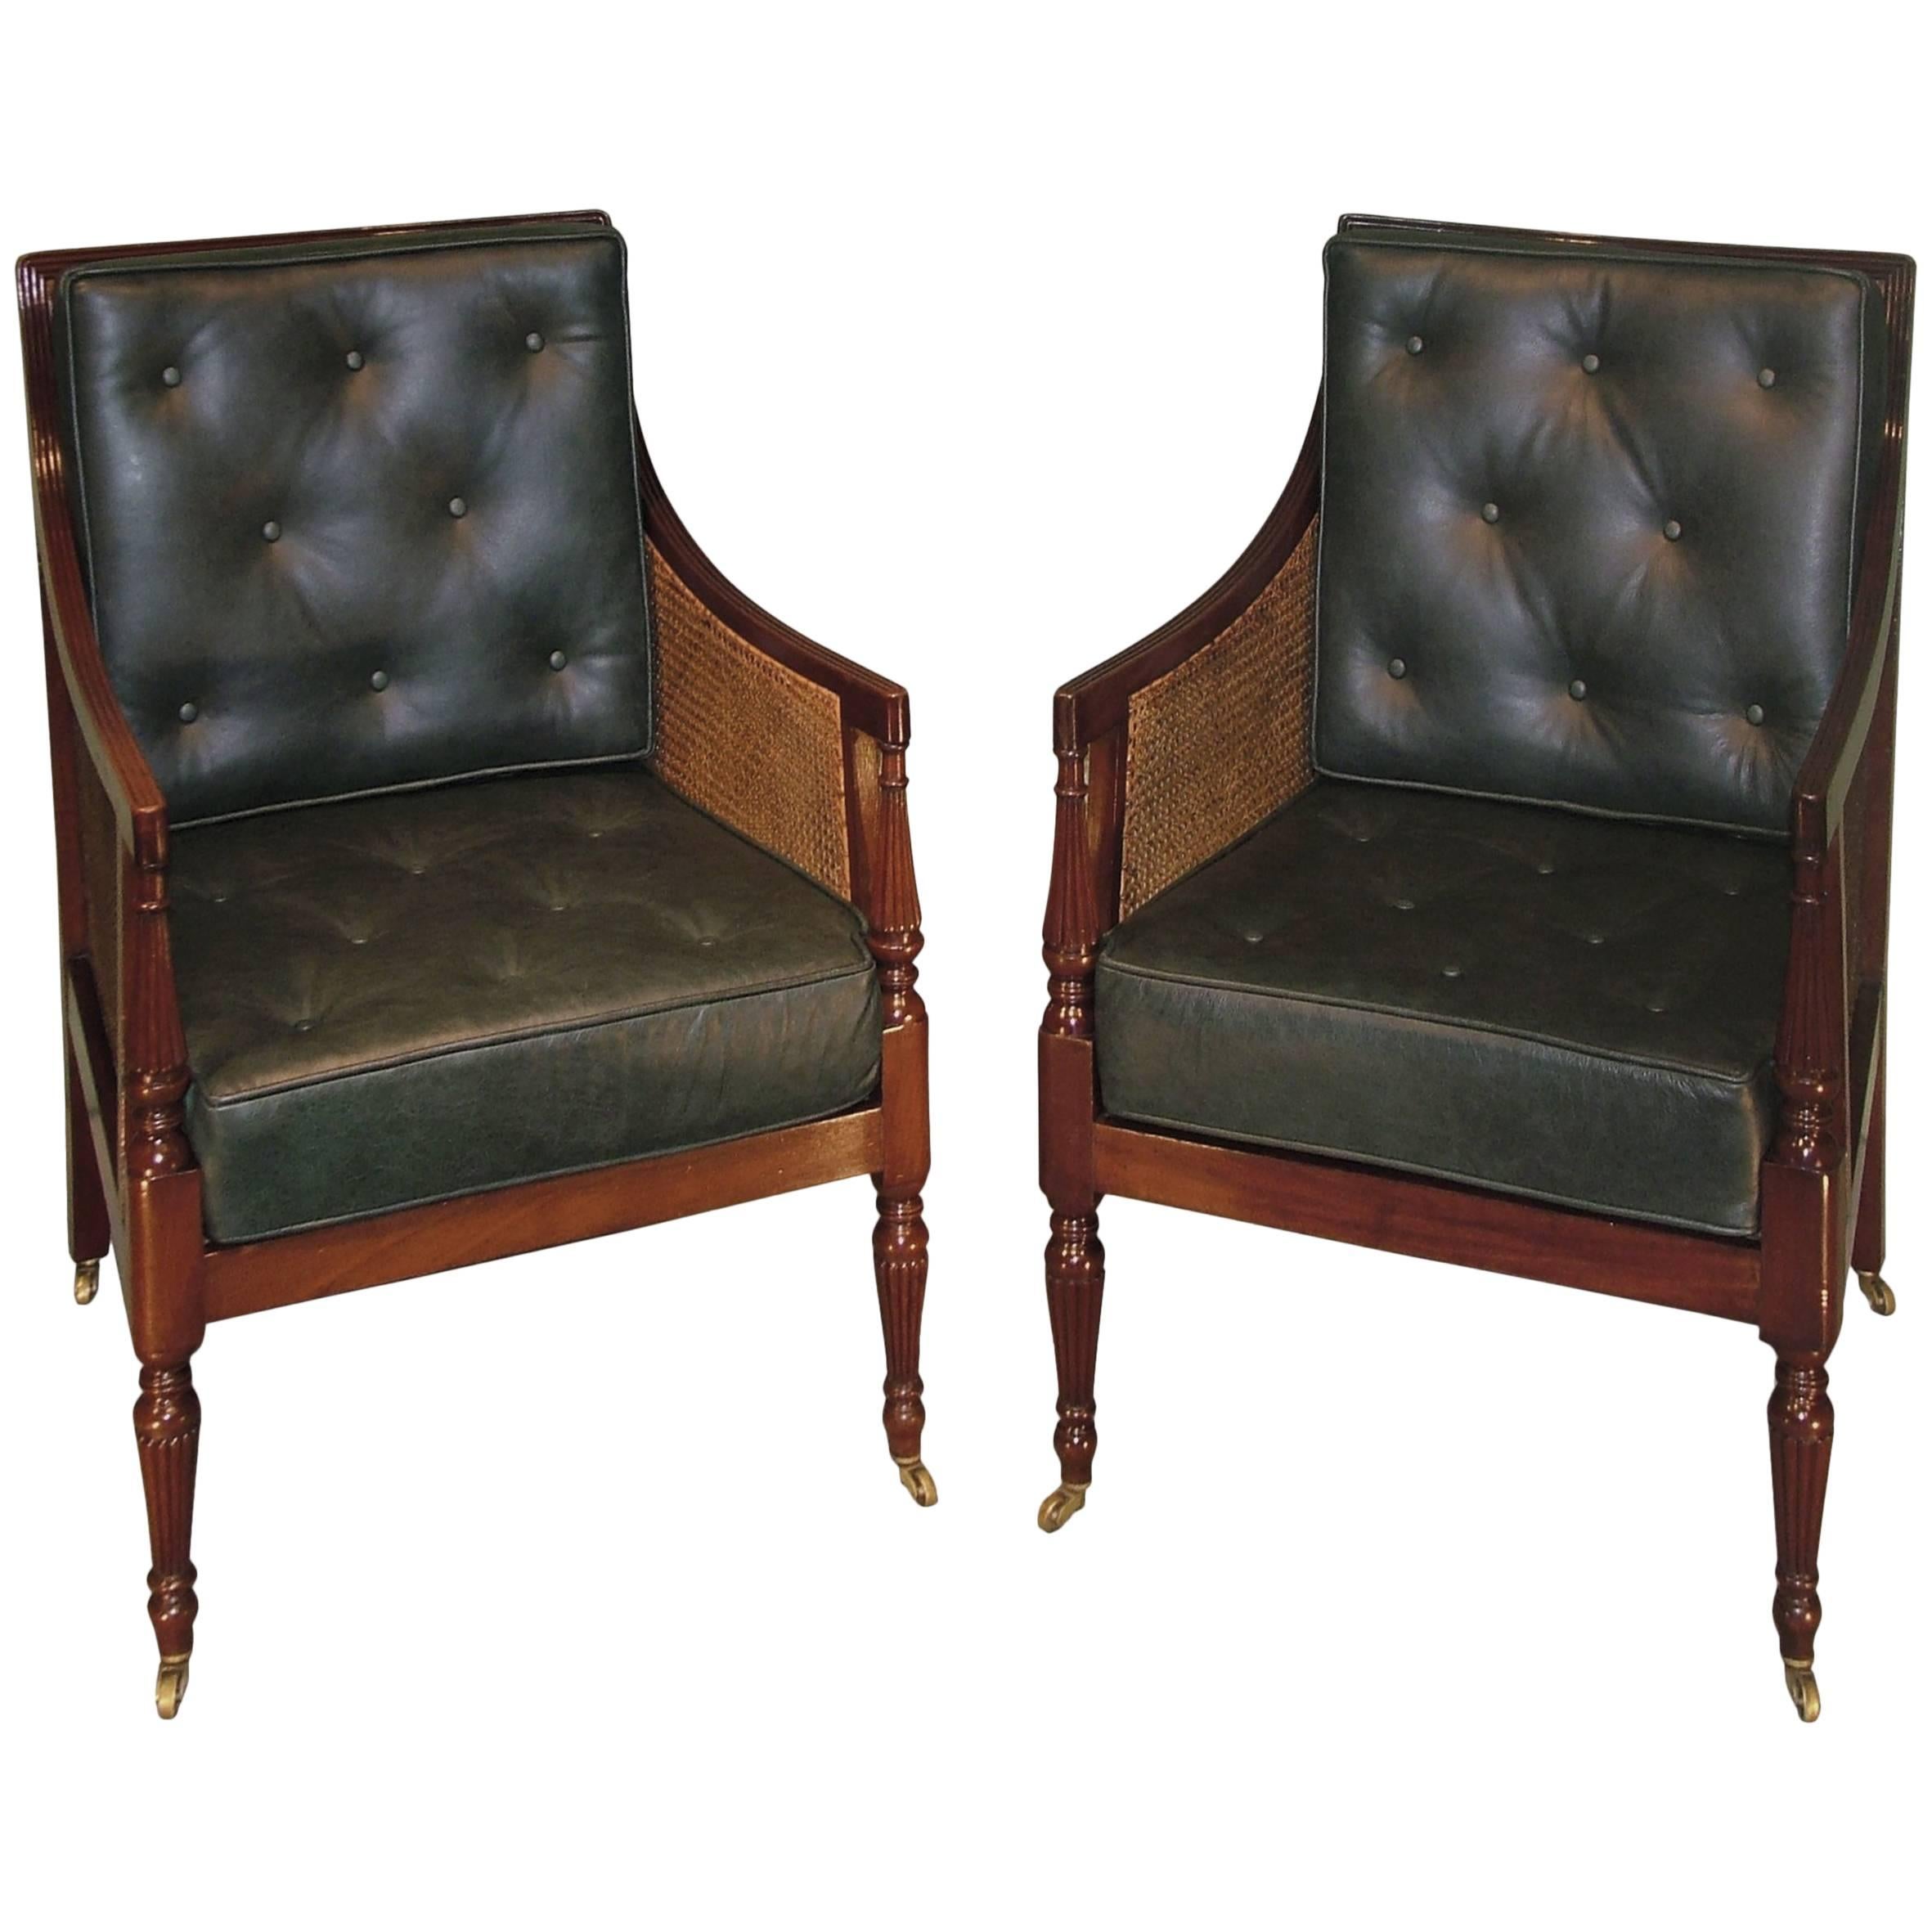 19th Century mahogany library bergere chairs